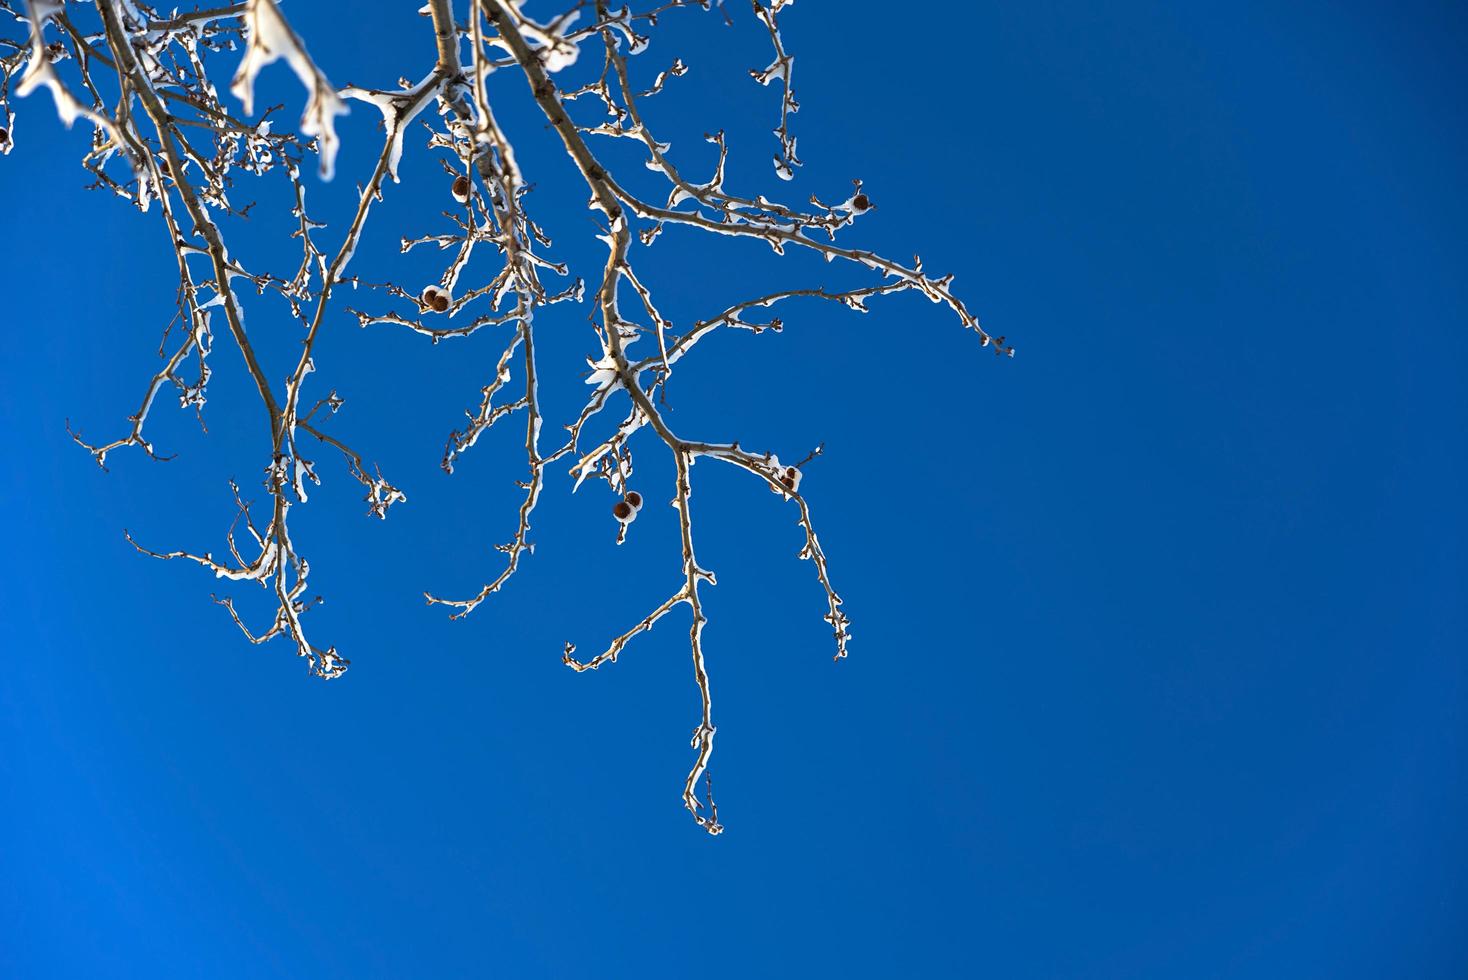 Snowy Tree on Blue Sky with Copy Space photo